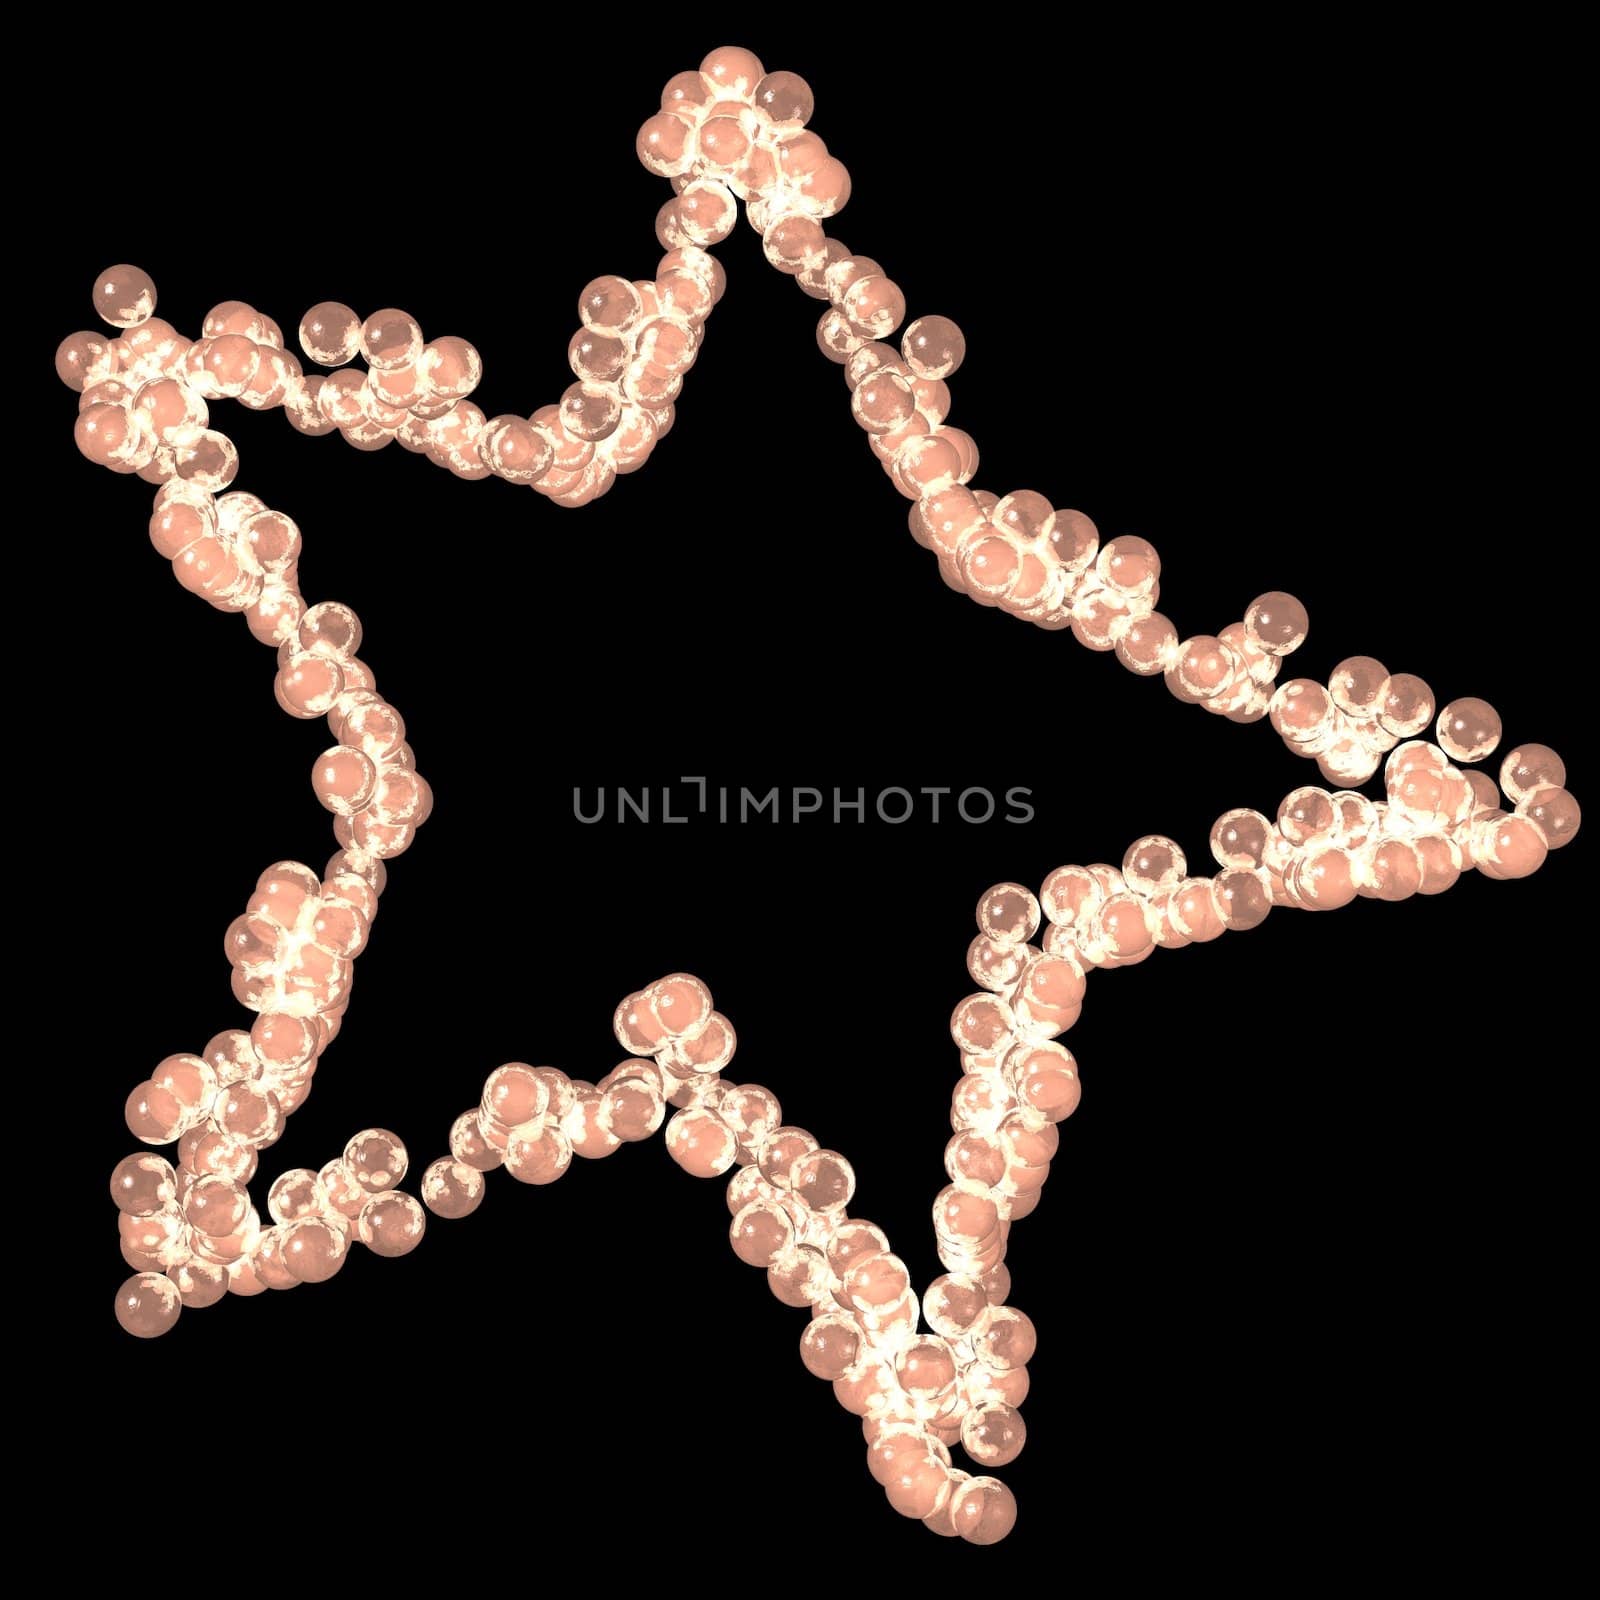 A pink star made of translucent pink spheres.